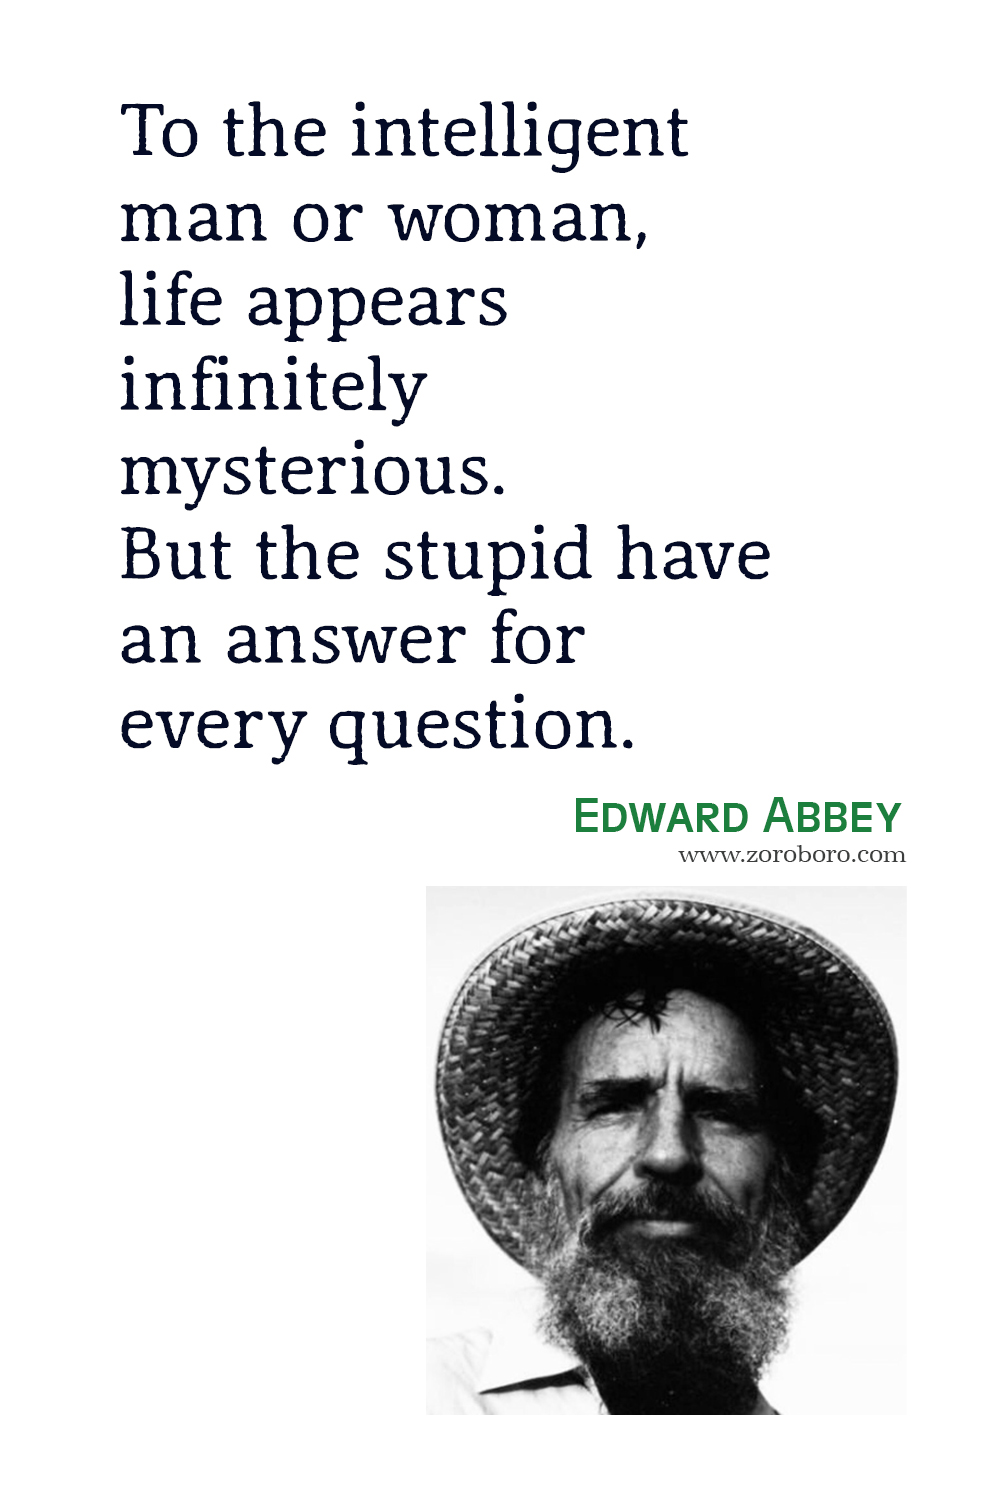 Edward Abbey Quotes, Edward Abbey Desert Solitaire: A Season in the Wilderness Quotes, Edward Abbey Environmentalist, Edward Abbey Books Quotes